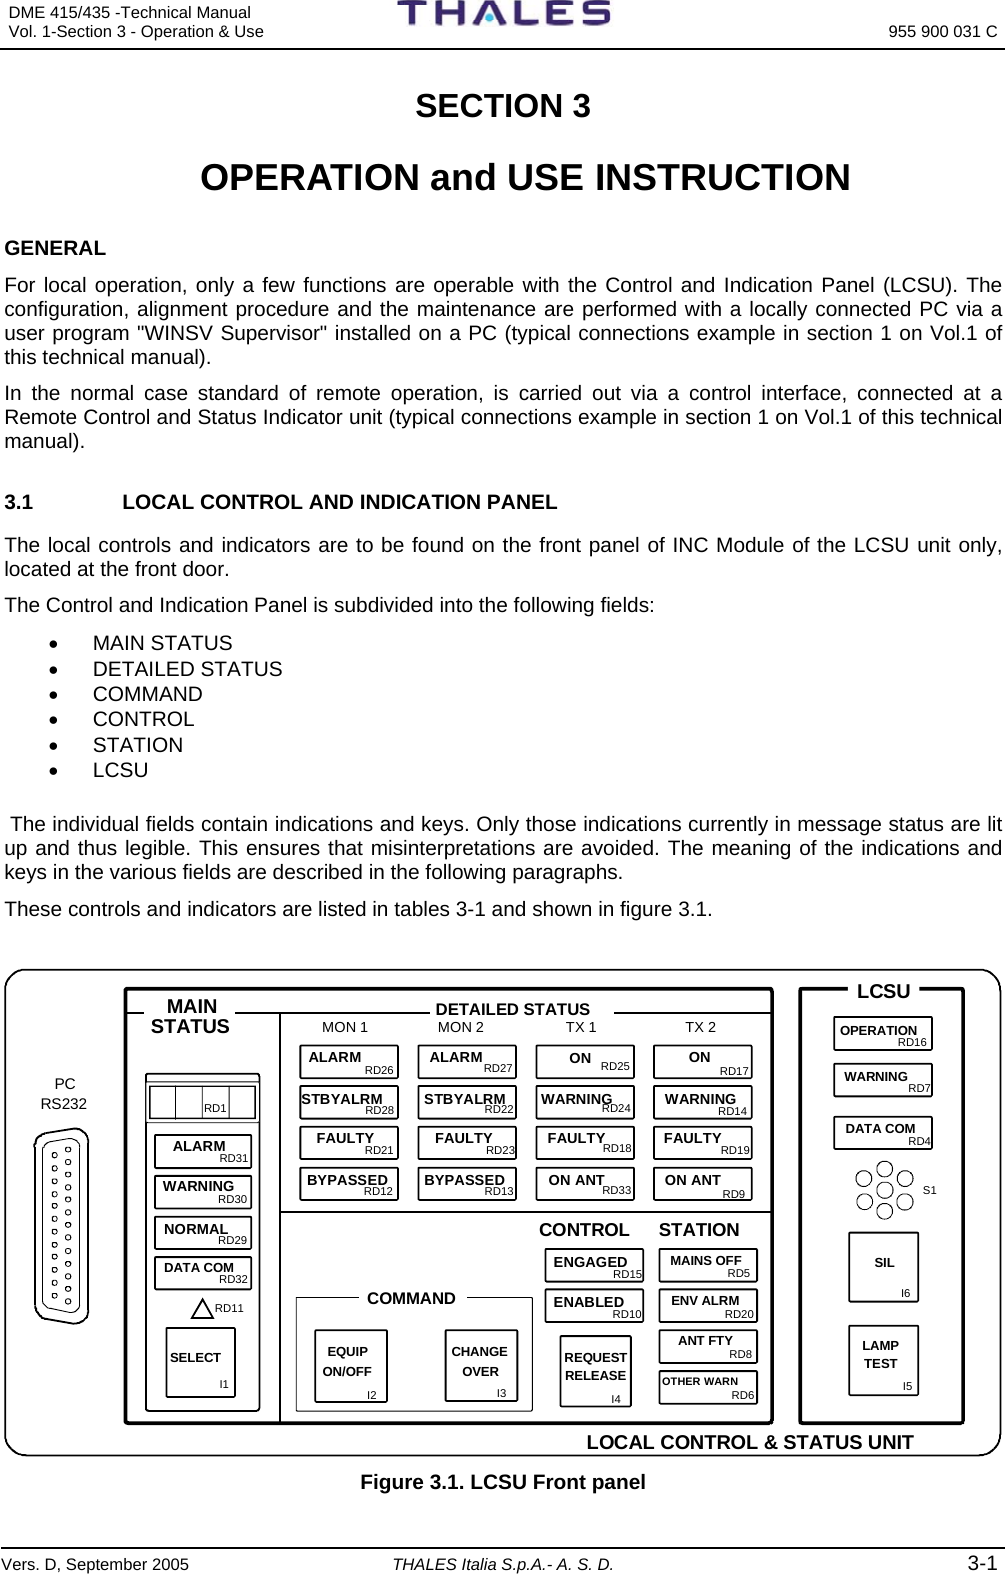 DME 415/435 -Technical Manual  Vol. 1-Section 3 - Operation &amp; Use   955 900 031 C Vers. D, September 2005 THALES Italia S.p.A.- A. S. D. 3-1 SECTION 3   OPERATION and USE INSTRUCTION GENERAL For local operation, only a few functions are operable with the Control and Indication Panel (LCSU). The configuration, alignment procedure and the maintenance are performed with a locally connected PC via a user program &quot;WINSV Supervisor&quot; installed on a PC (typical connections example in section 1 on Vol.1 of this technical manual). In the normal case standard of remote operation, is carried out via a control interface, connected at a Remote Control and Status Indicator unit (typical connections example in section 1 on Vol.1 of this technical manual).  3.1  LOCAL CONTROL AND INDICATION PANEL The local controls and indicators are to be found on the front panel of INC Module of the LCSU unit only, located at the front door.  The Control and Indication Panel is subdivided into the following fields: •  MAIN STATUS  • DETAILED STATUS • COMMAND • CONTROL • STATION  • LCSU   The individual fields contain indications and keys. Only those indications currently in message status are lit up and thus legible. This ensures that misinterpretations are avoided. The meaning of the indications and keys in the various fields are described in the following paragraphs. These controls and indicators are listed in tables 3-1 and shown in figure 3.1.    MON 1 MON 2 TX 1 TX 2DETAILED STATUS LCSULOCAL CONTROL &amp; STATUS UNITCONTROL STATIONALARMWARNINGNORMALDATA COMALARM ALARMWARNING WARNINGWARNINGCOMMANDSTBYALRM STBYALRMON ONFAULTY FAULTY FAULTY FAULTYBYPASSED BYPASSED ON ANT ON ANTOPERATIONENGAGEDENABLEDMAINS OFFENV ALRMANT FTYOTHER WARNCHANGEOVEREQUIPON/OFFSELECT LAMPTESTREQUESTRELEASESILDATA COMPCRS232 RD1RD31RD30RD29RD32RD11RD26RD28RD21RD12RD27RD22RD23RD13RD25RD24RD18RD33RD17RD14RD19RD9RD15RD10RD5RD20RD8RD6RD7RD16RD4S1I6I5I4I3I2I1MAINSTATUS Figure 3.1. LCSU Front panel  